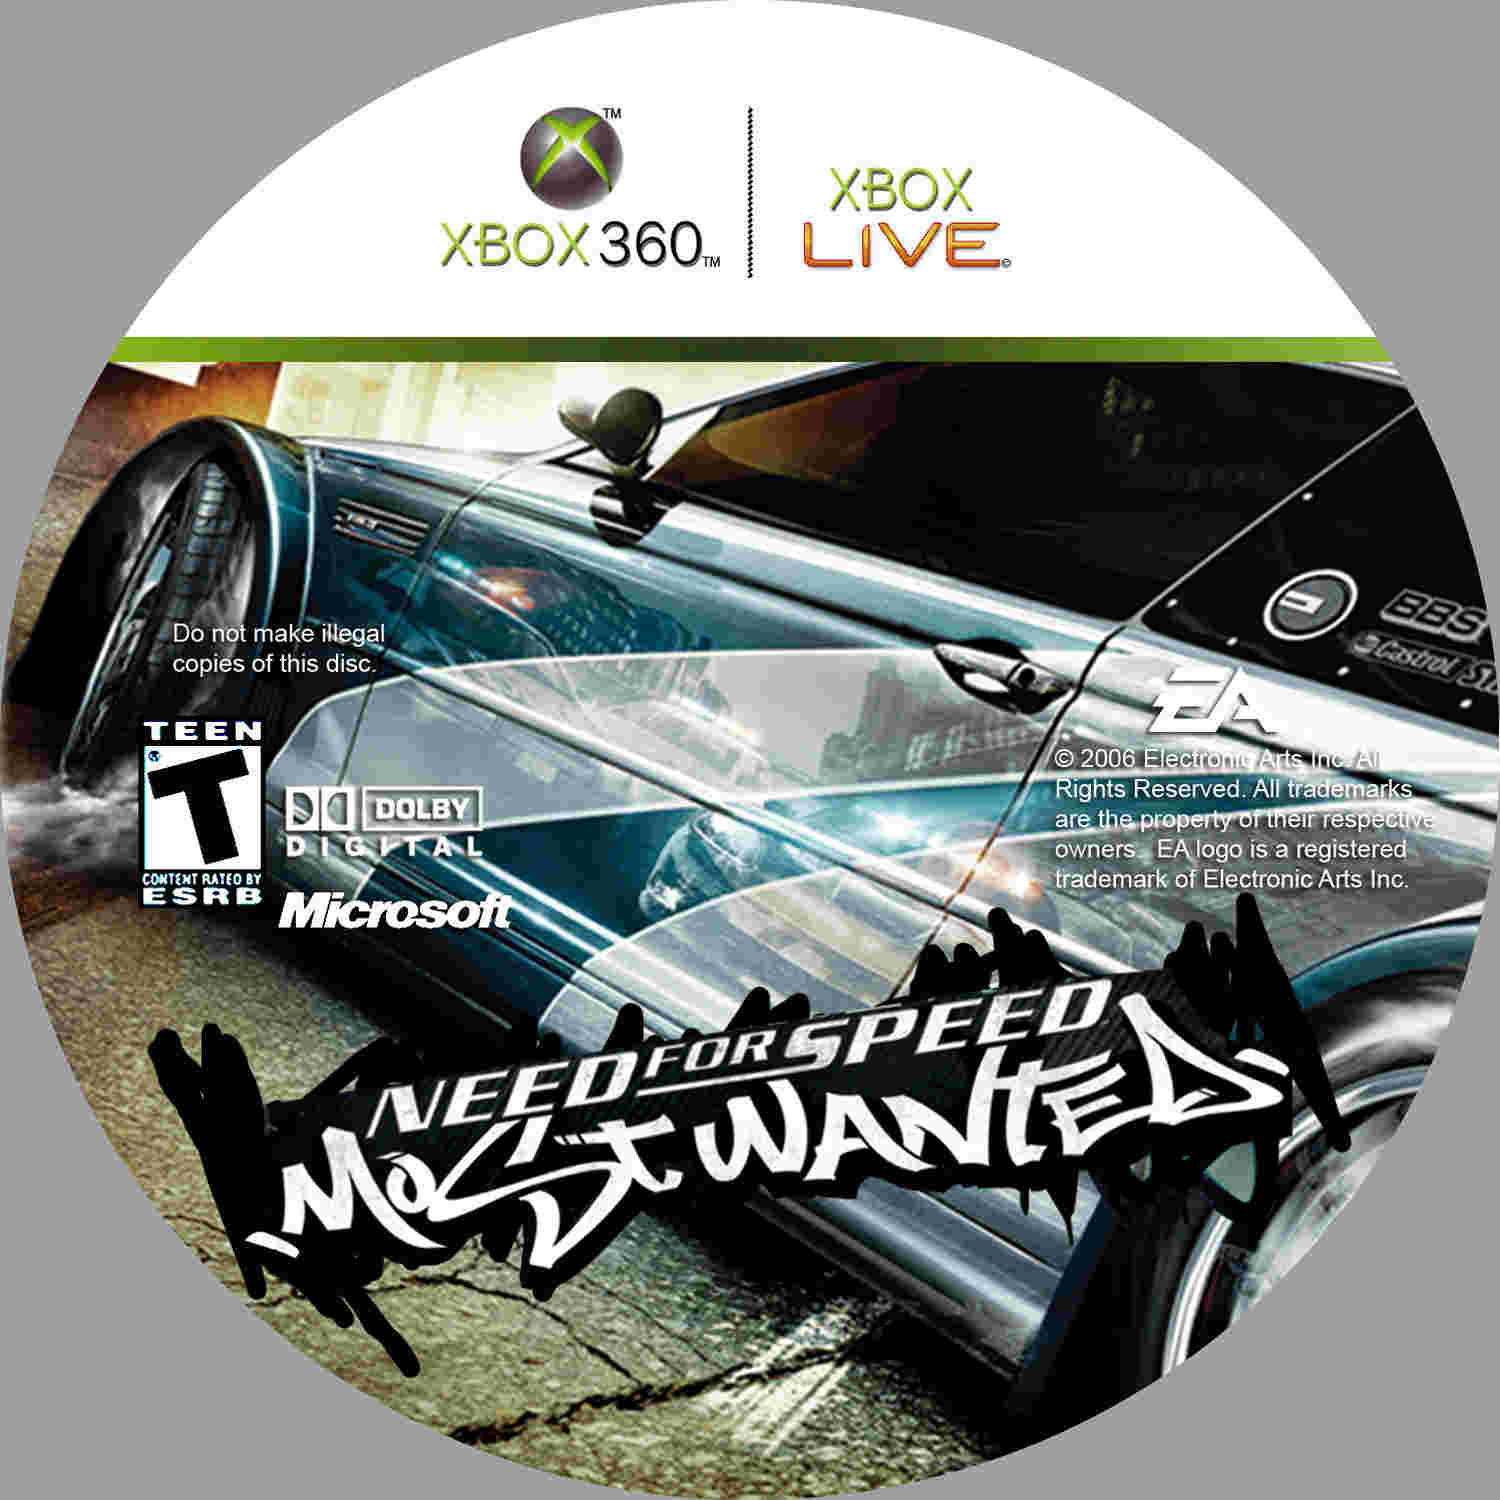 Купить игру need for speed. Need for Speed Xbox 360 диск. NFS most wanted диск Xbox 360. NFS most wanted 2005 Xbox 360 русская версия. NFS most wanted 2005 диск.